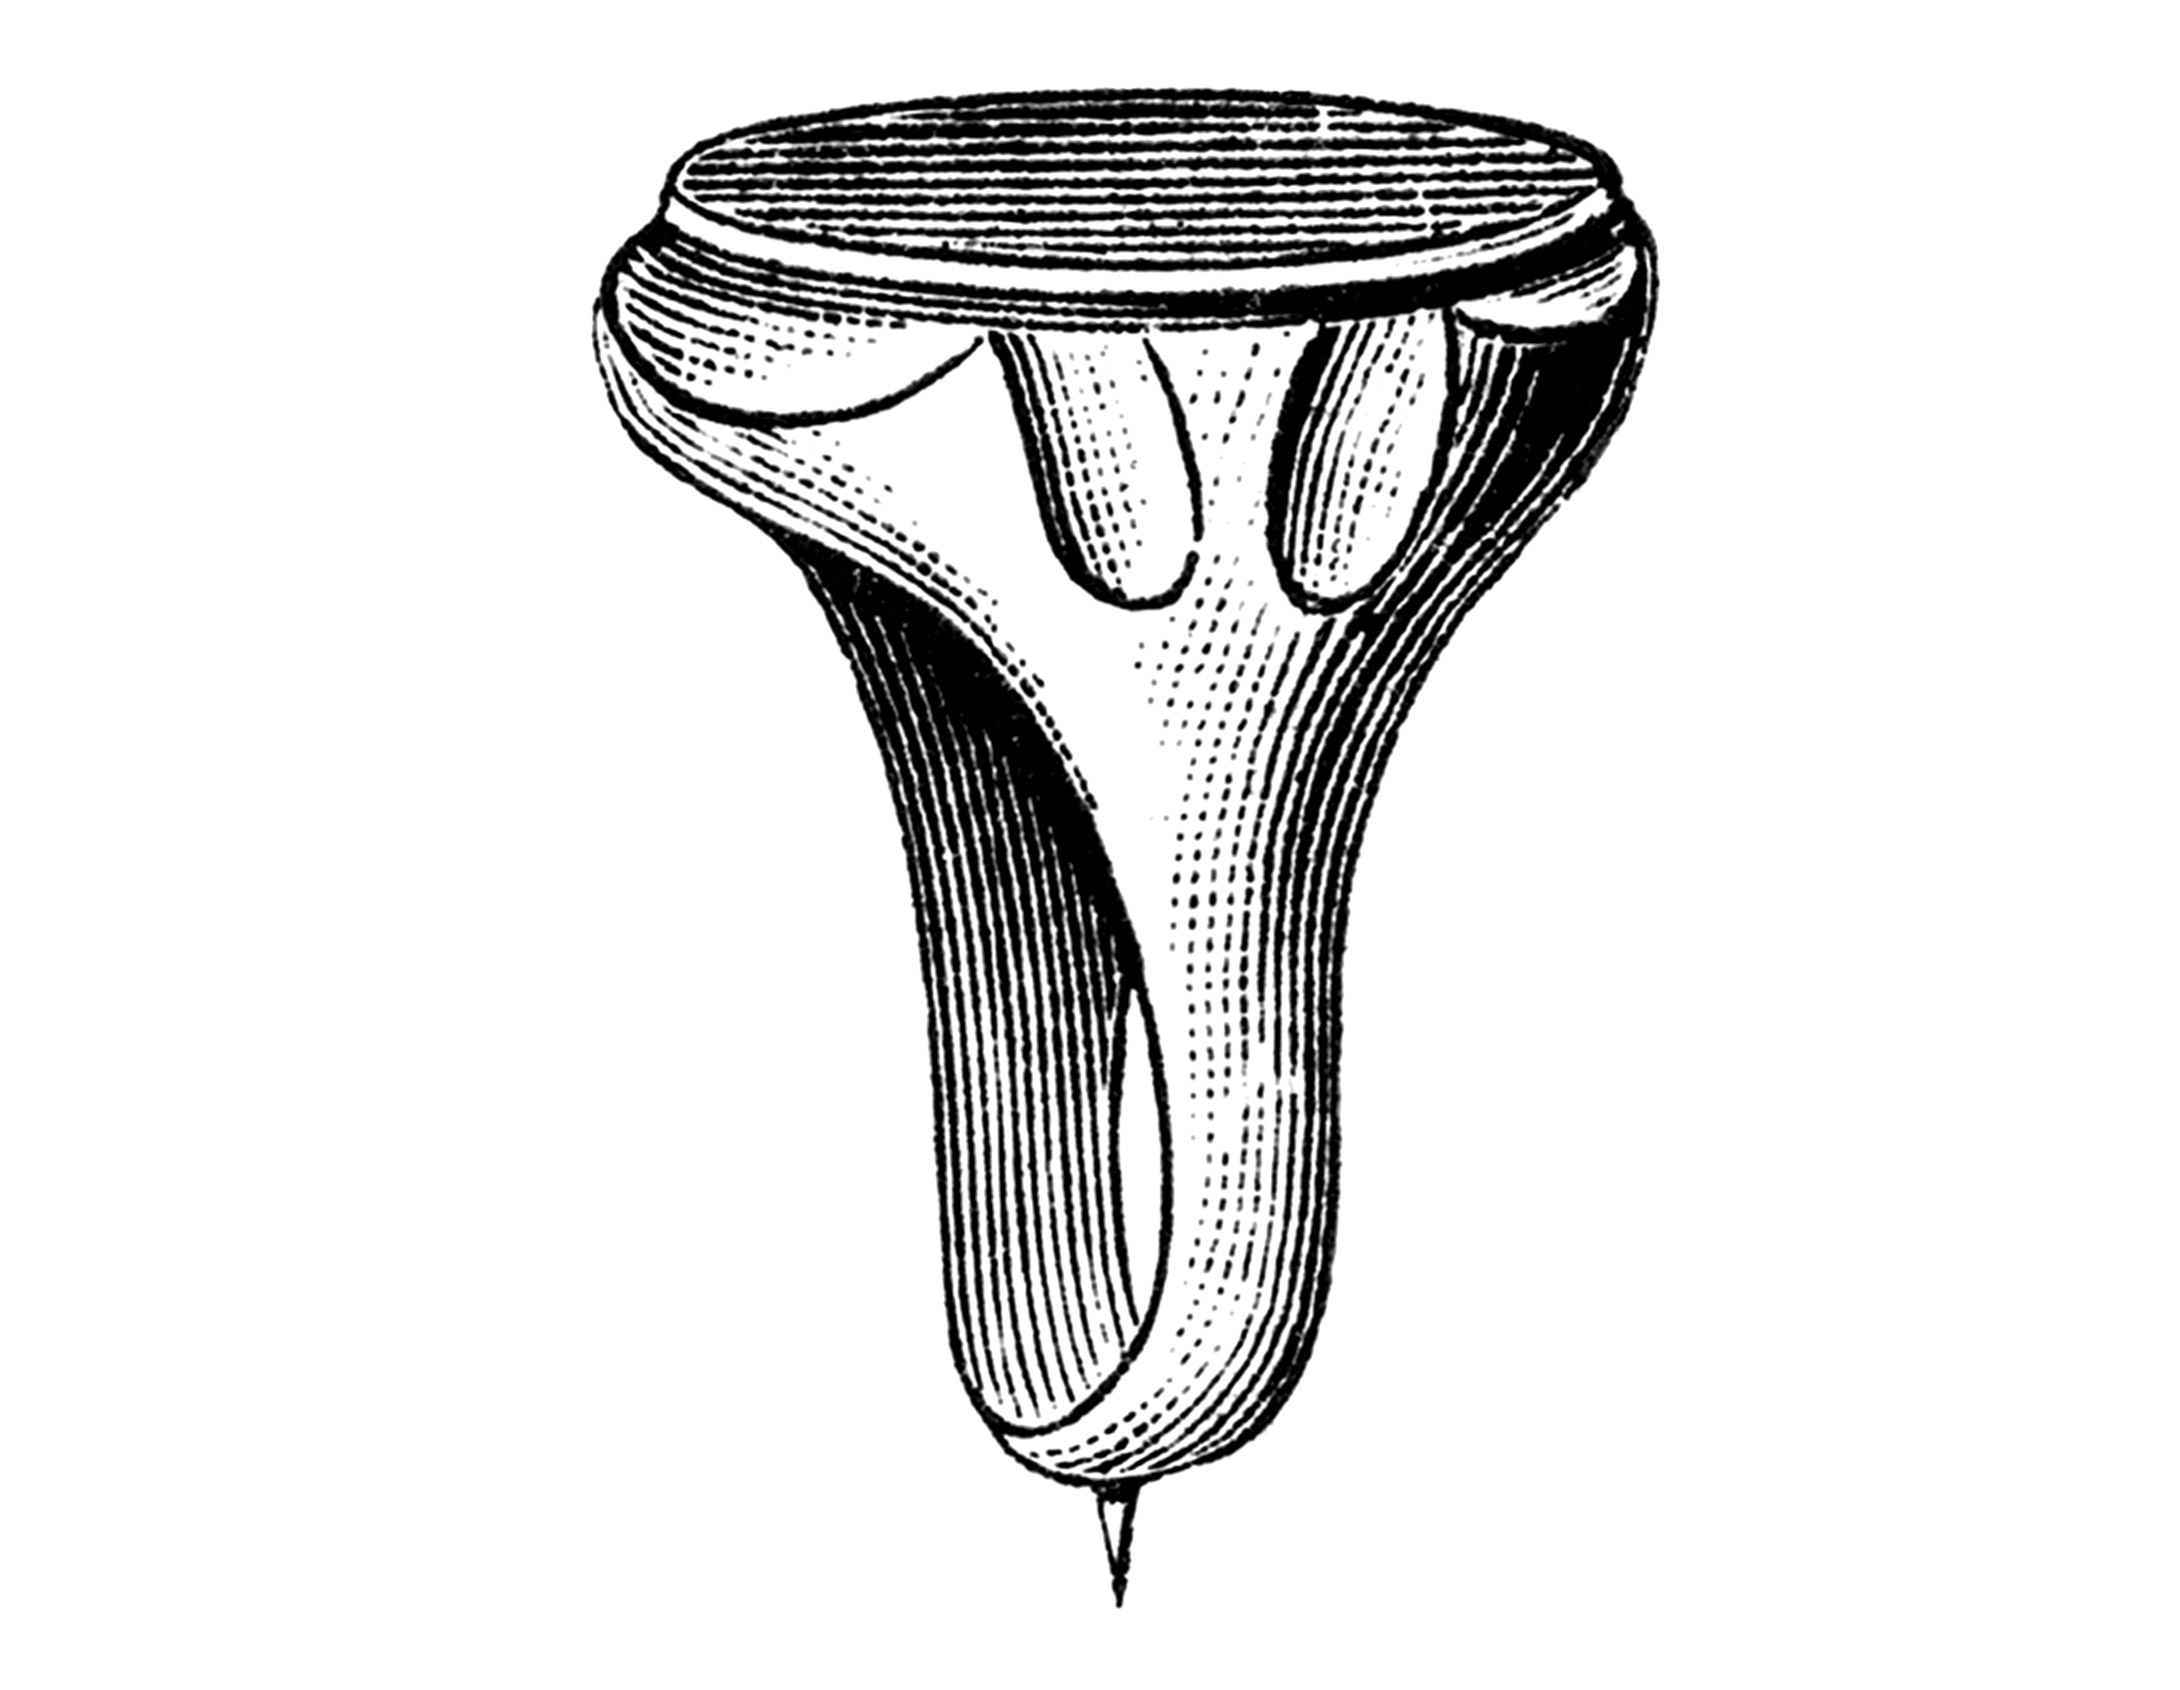 An ink-filled ring (known as a trépan), used for secretly marking cards during open play. From Sharps and Flats: A Complete Revelation of the Secrets of Cheating (1894) by John Nevil Maskelyne. Courtesy The Magic Circle Library.